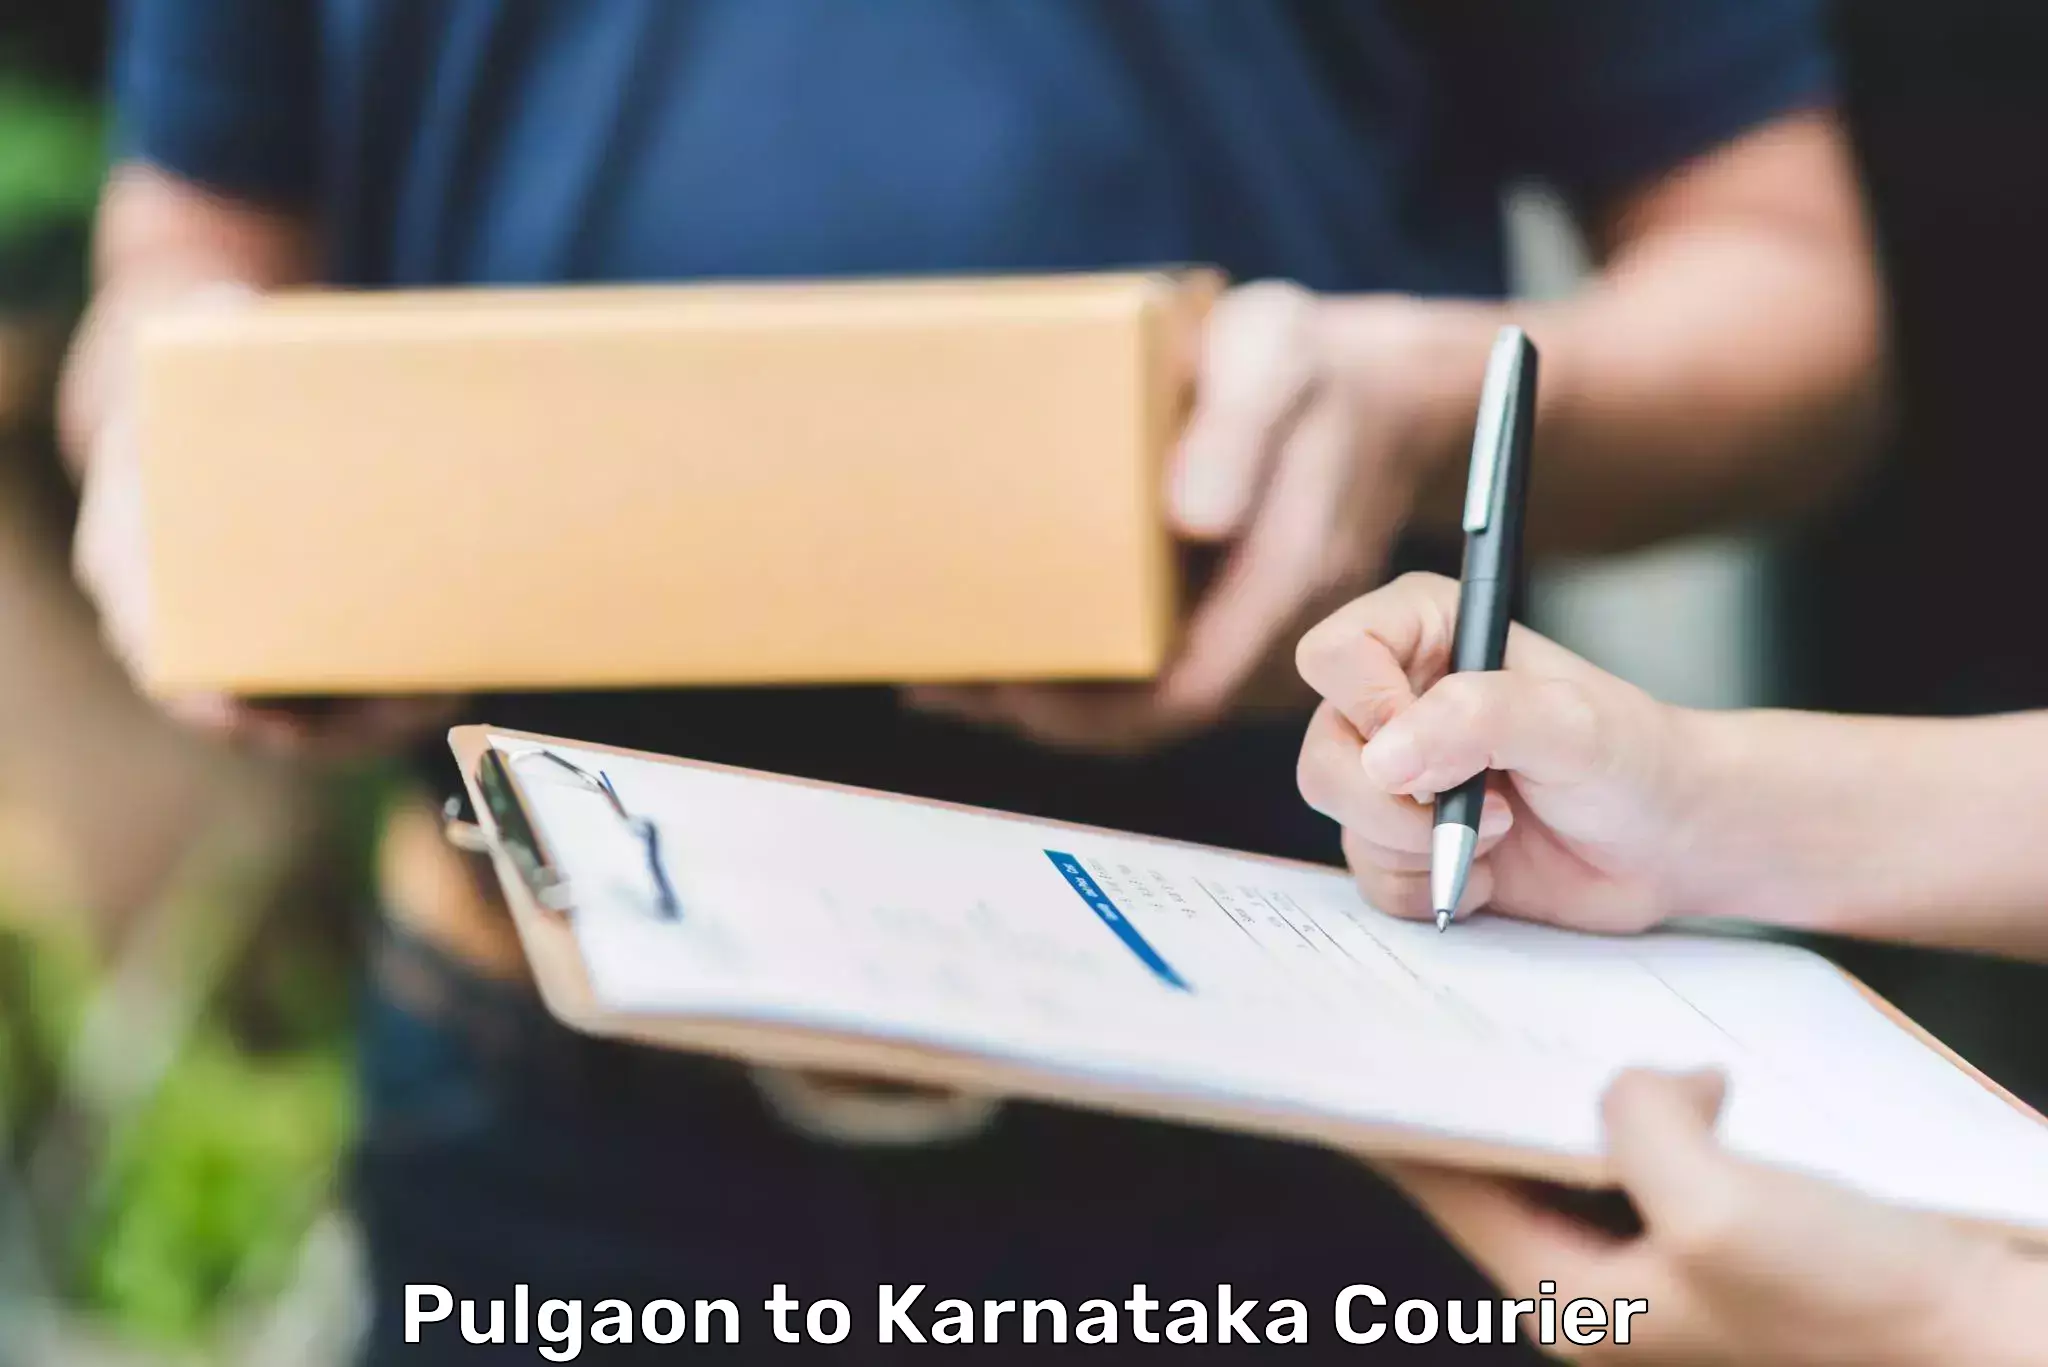 Courier service efficiency Pulgaon to Shorapur